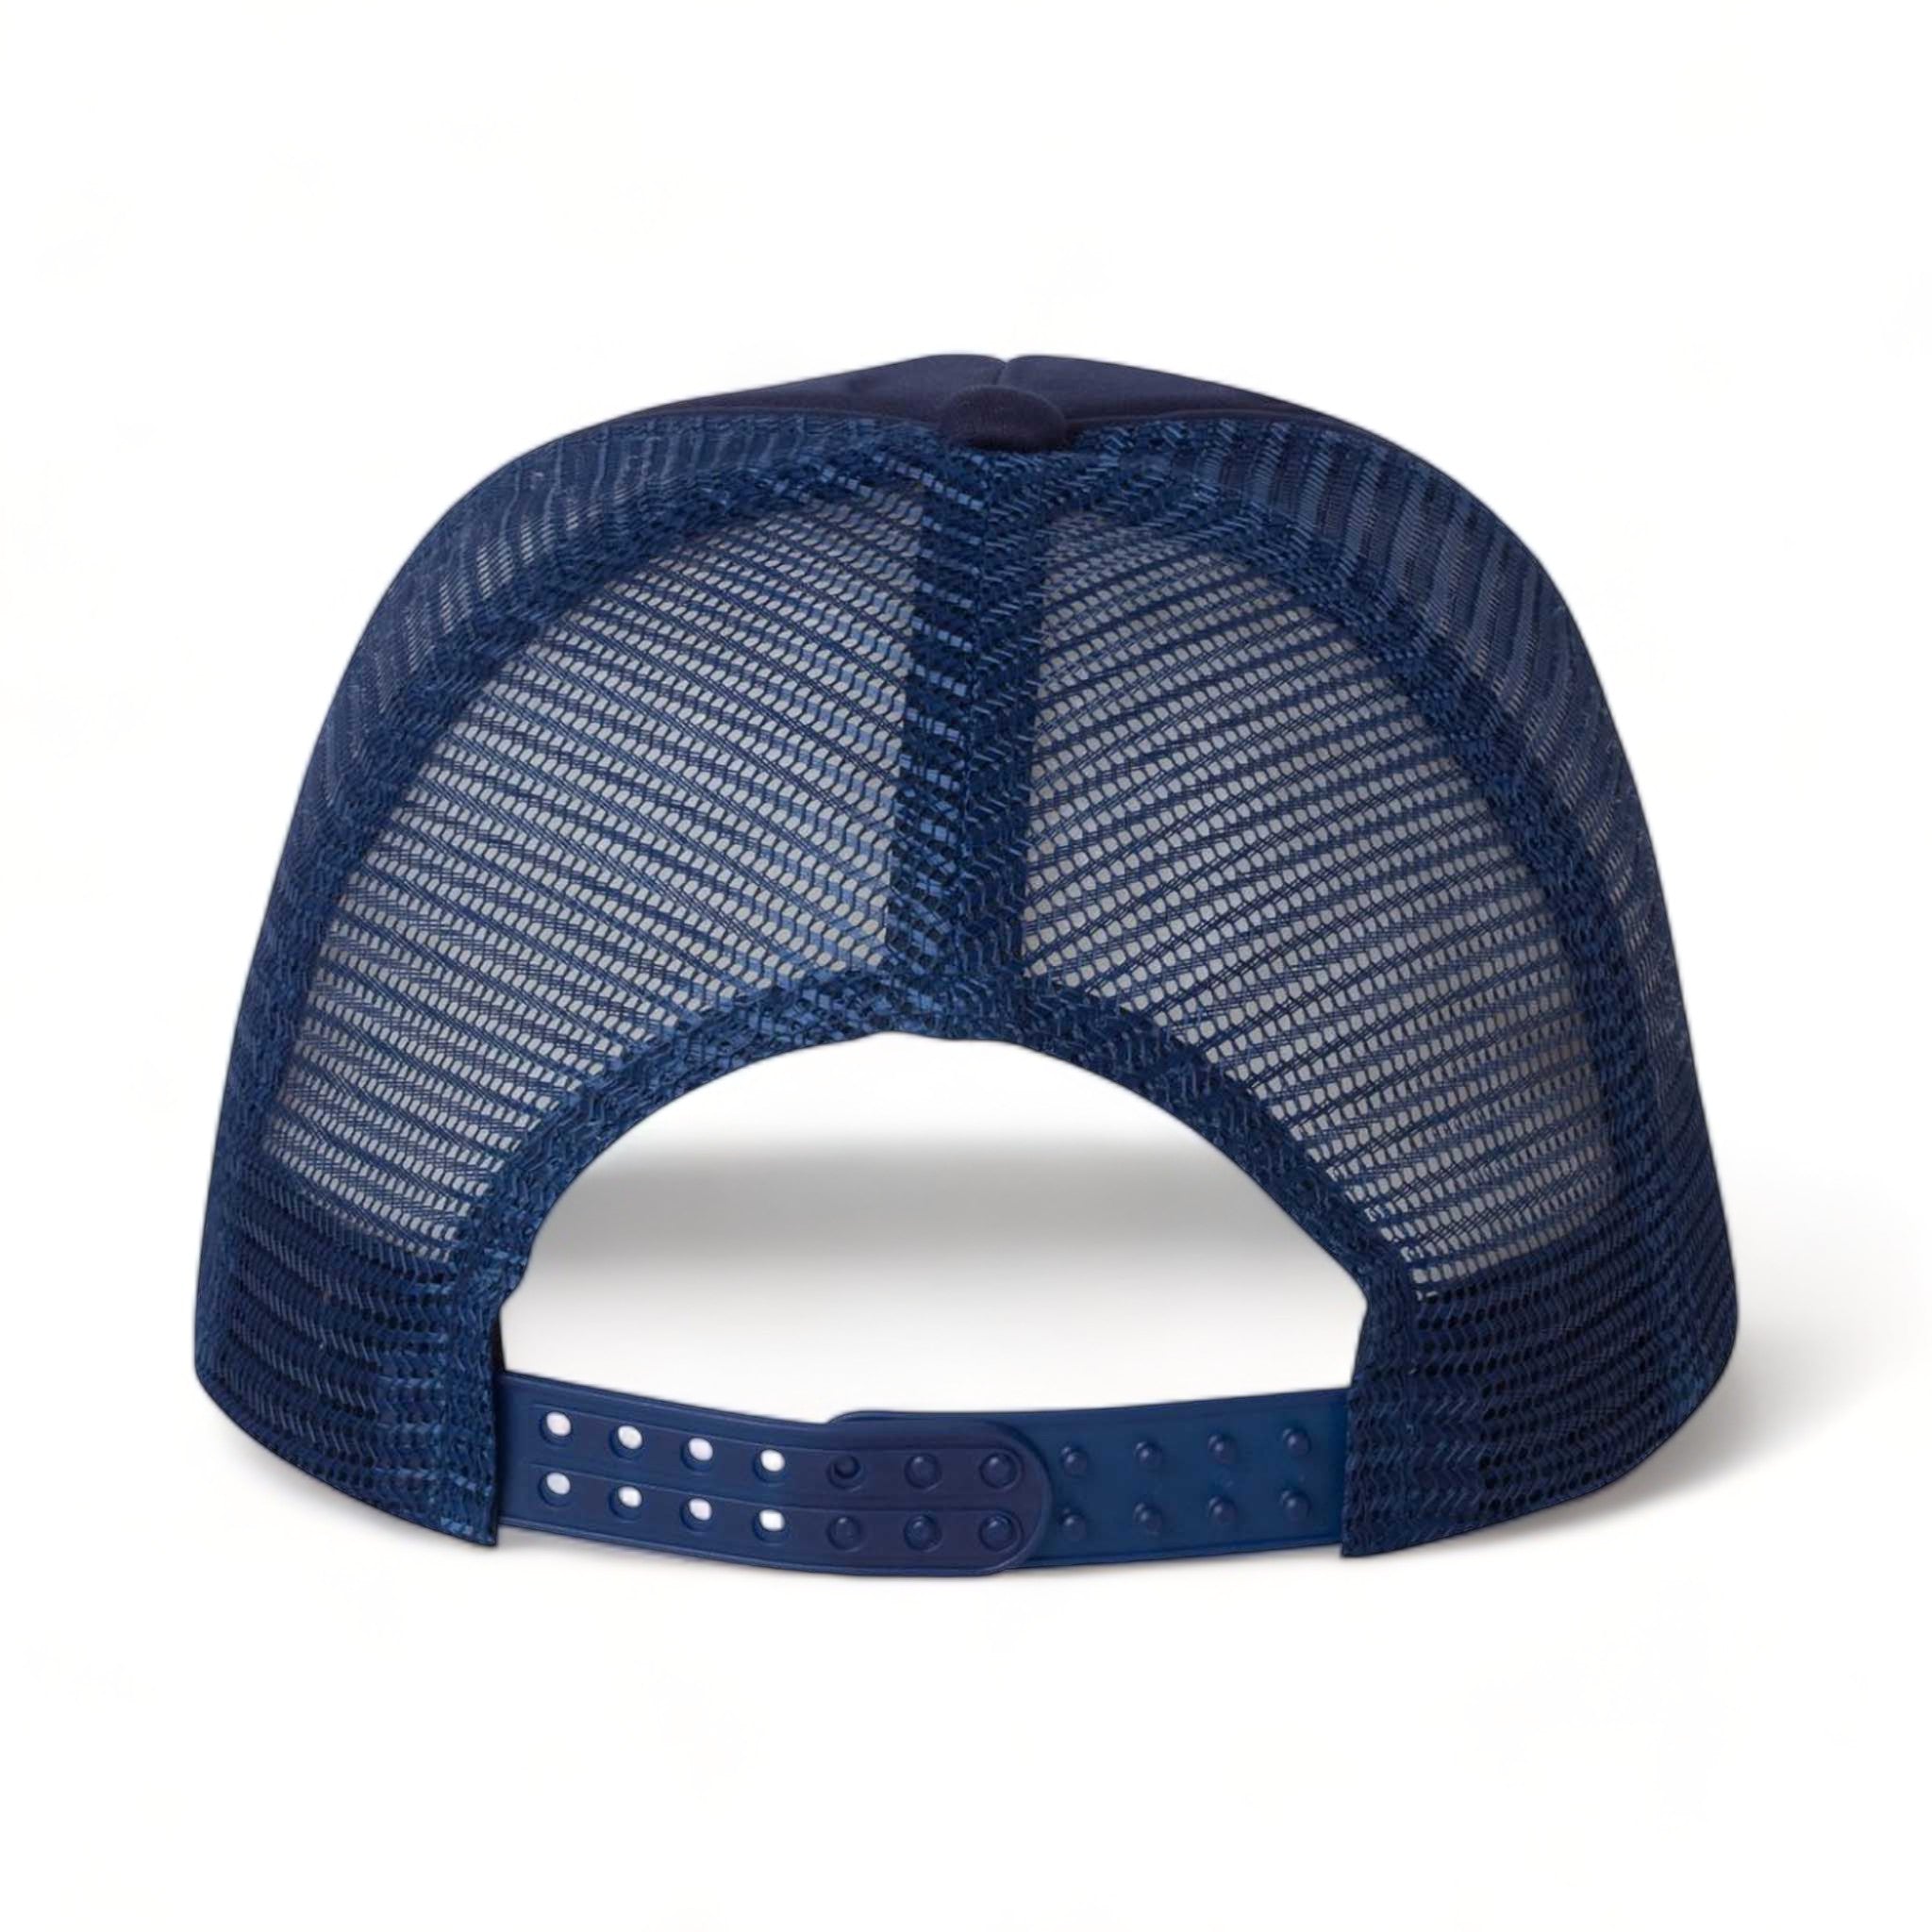 Back view of Valucap VC700 custom hat in navy and navy